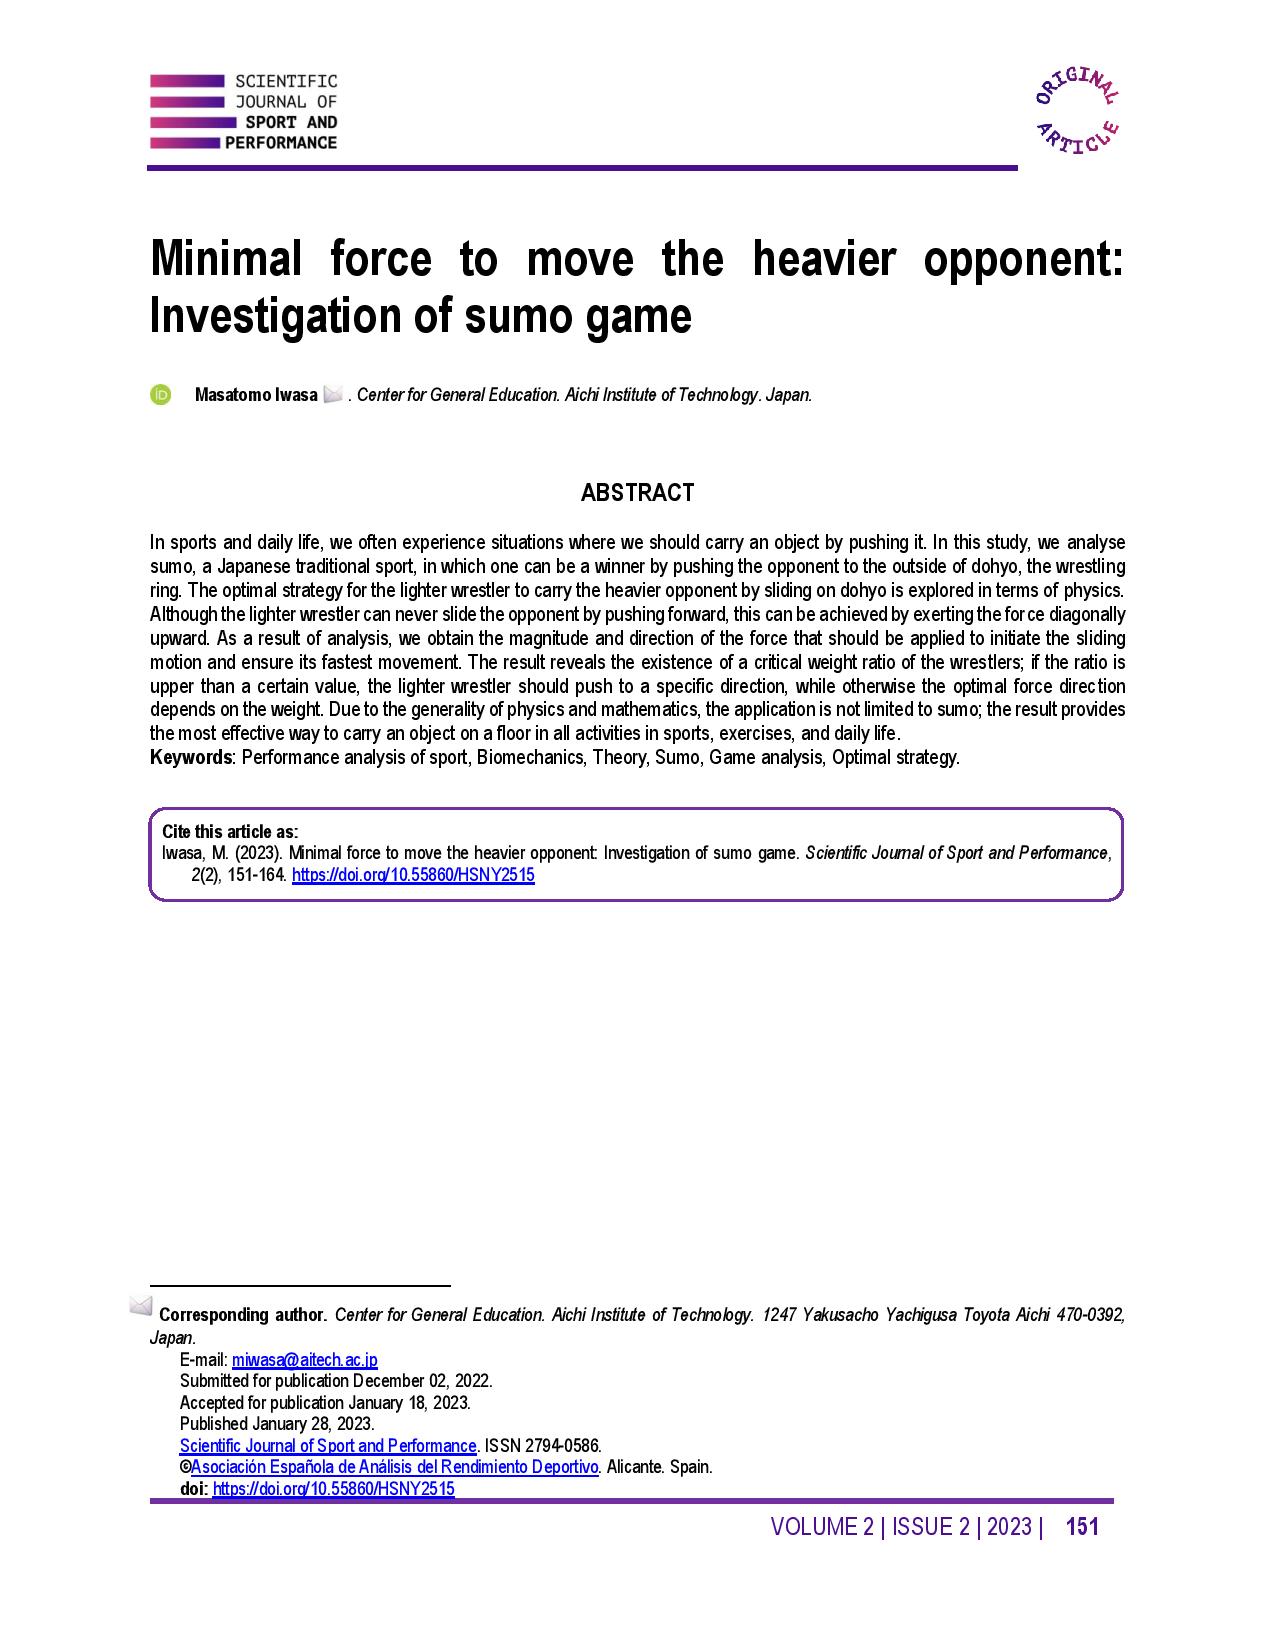 Minimal force to move the heavier opponent: Investigation of sumo game